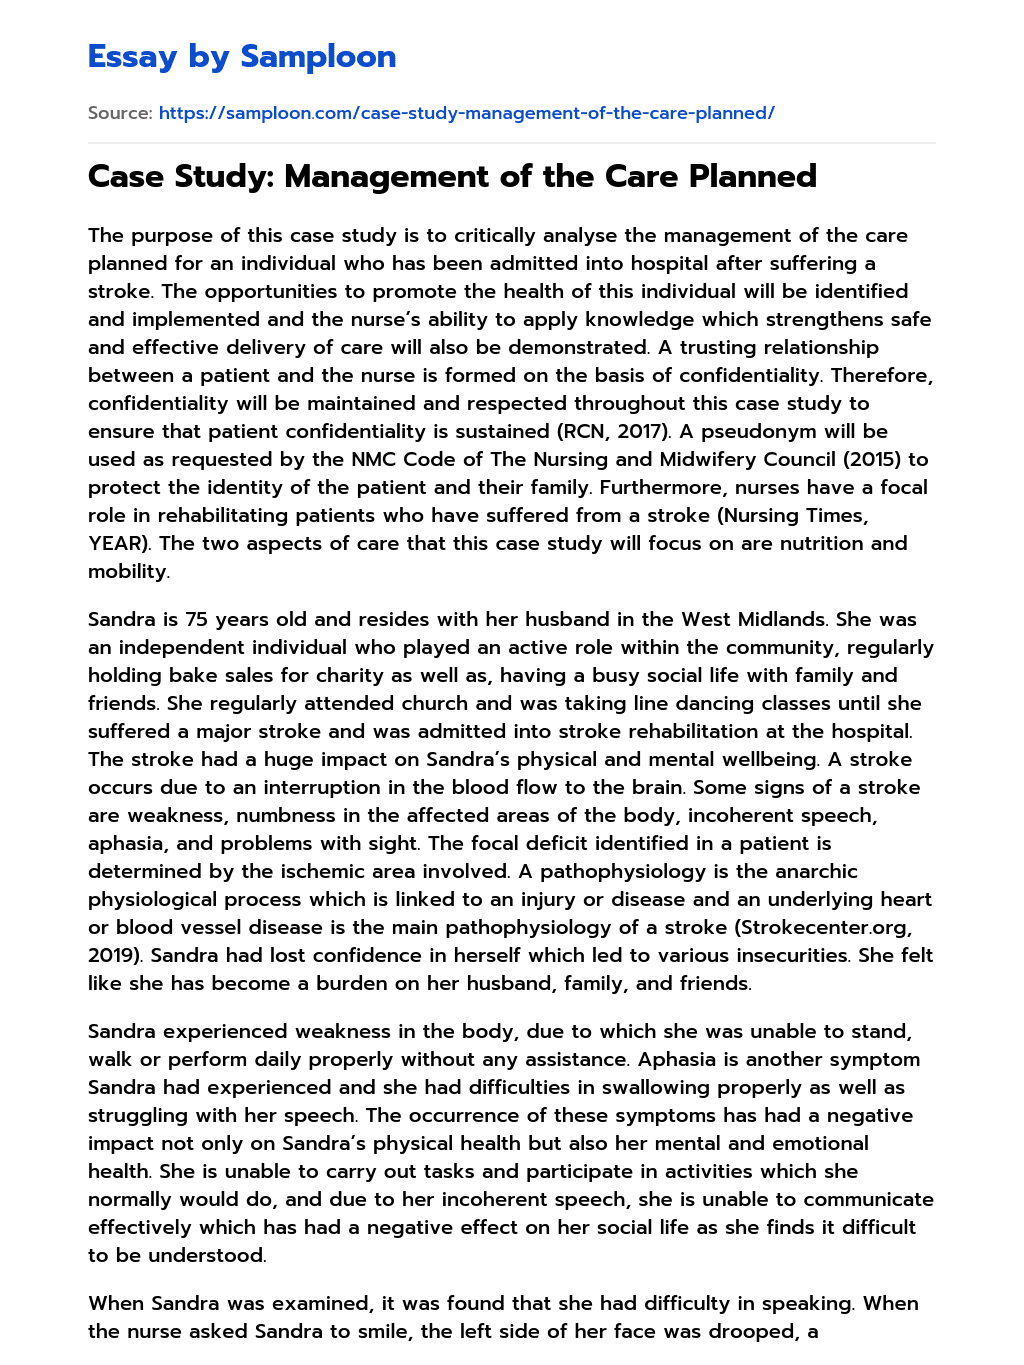 Case Study: Management of the Care Planned essay